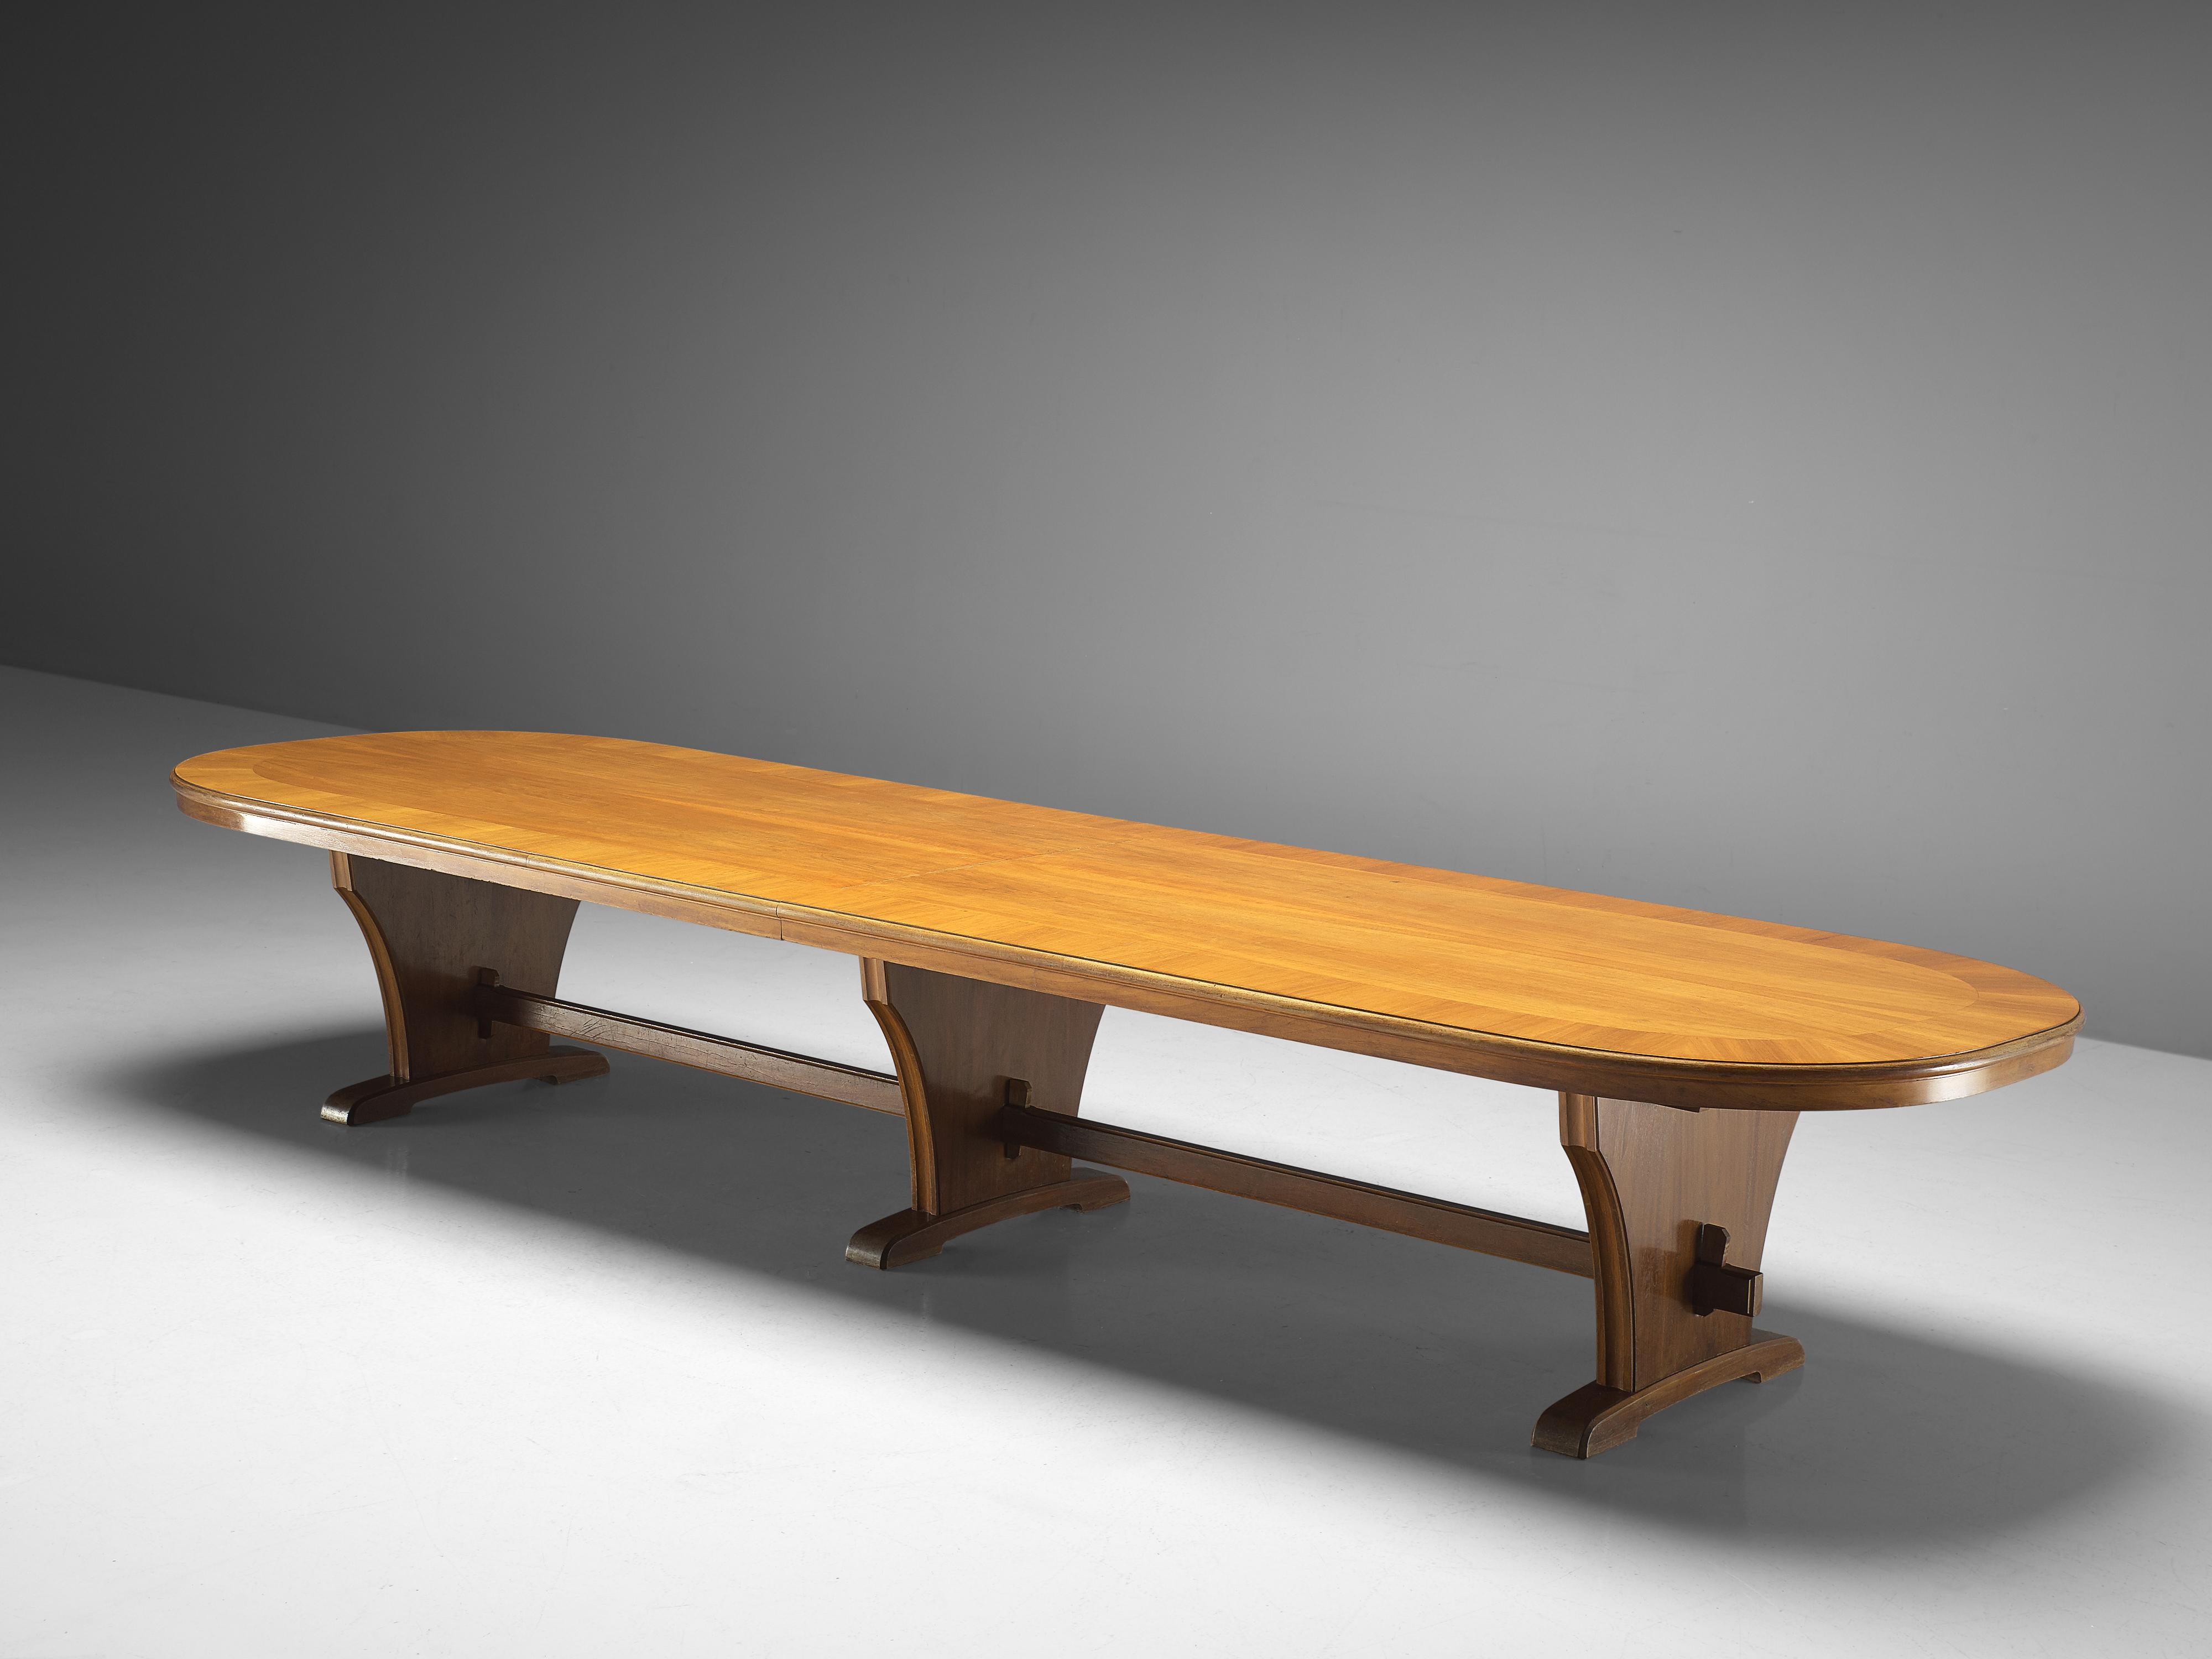 Conference table, veneered walnut, wood, Germany, 1950s

Very large oval dining or conference table with three legs. The mirrored grain of the book-matched Italian walnut is beautifully surrounded with an inlayed frame. Not only the tabletop has